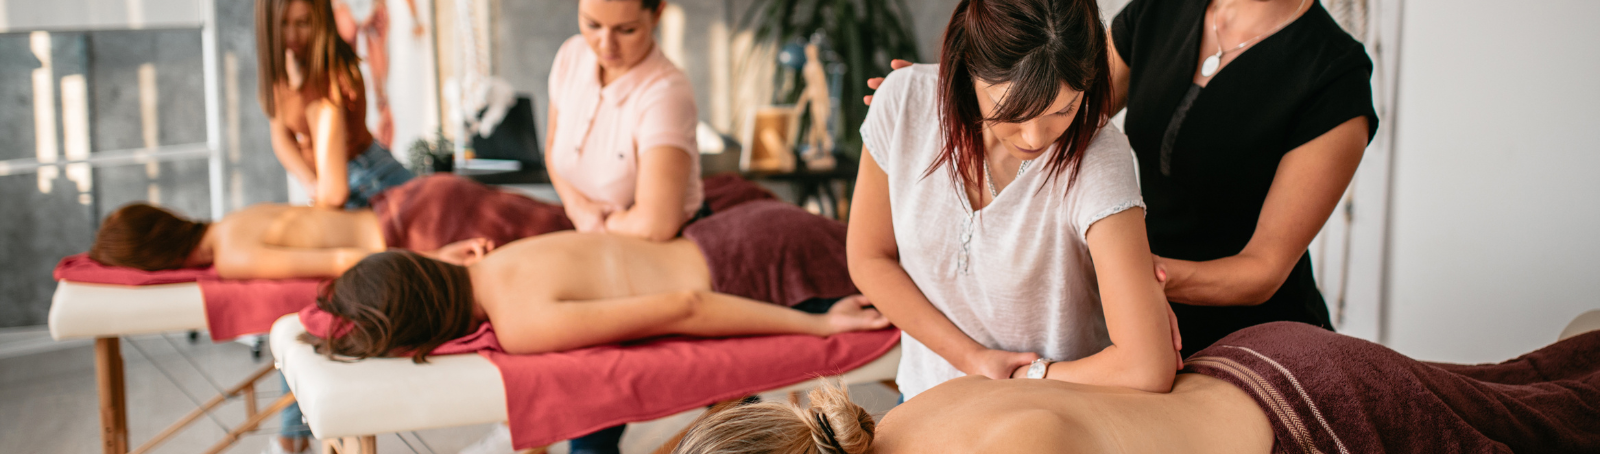 What to Expect During a Thai Massage Training Program in Bangkok